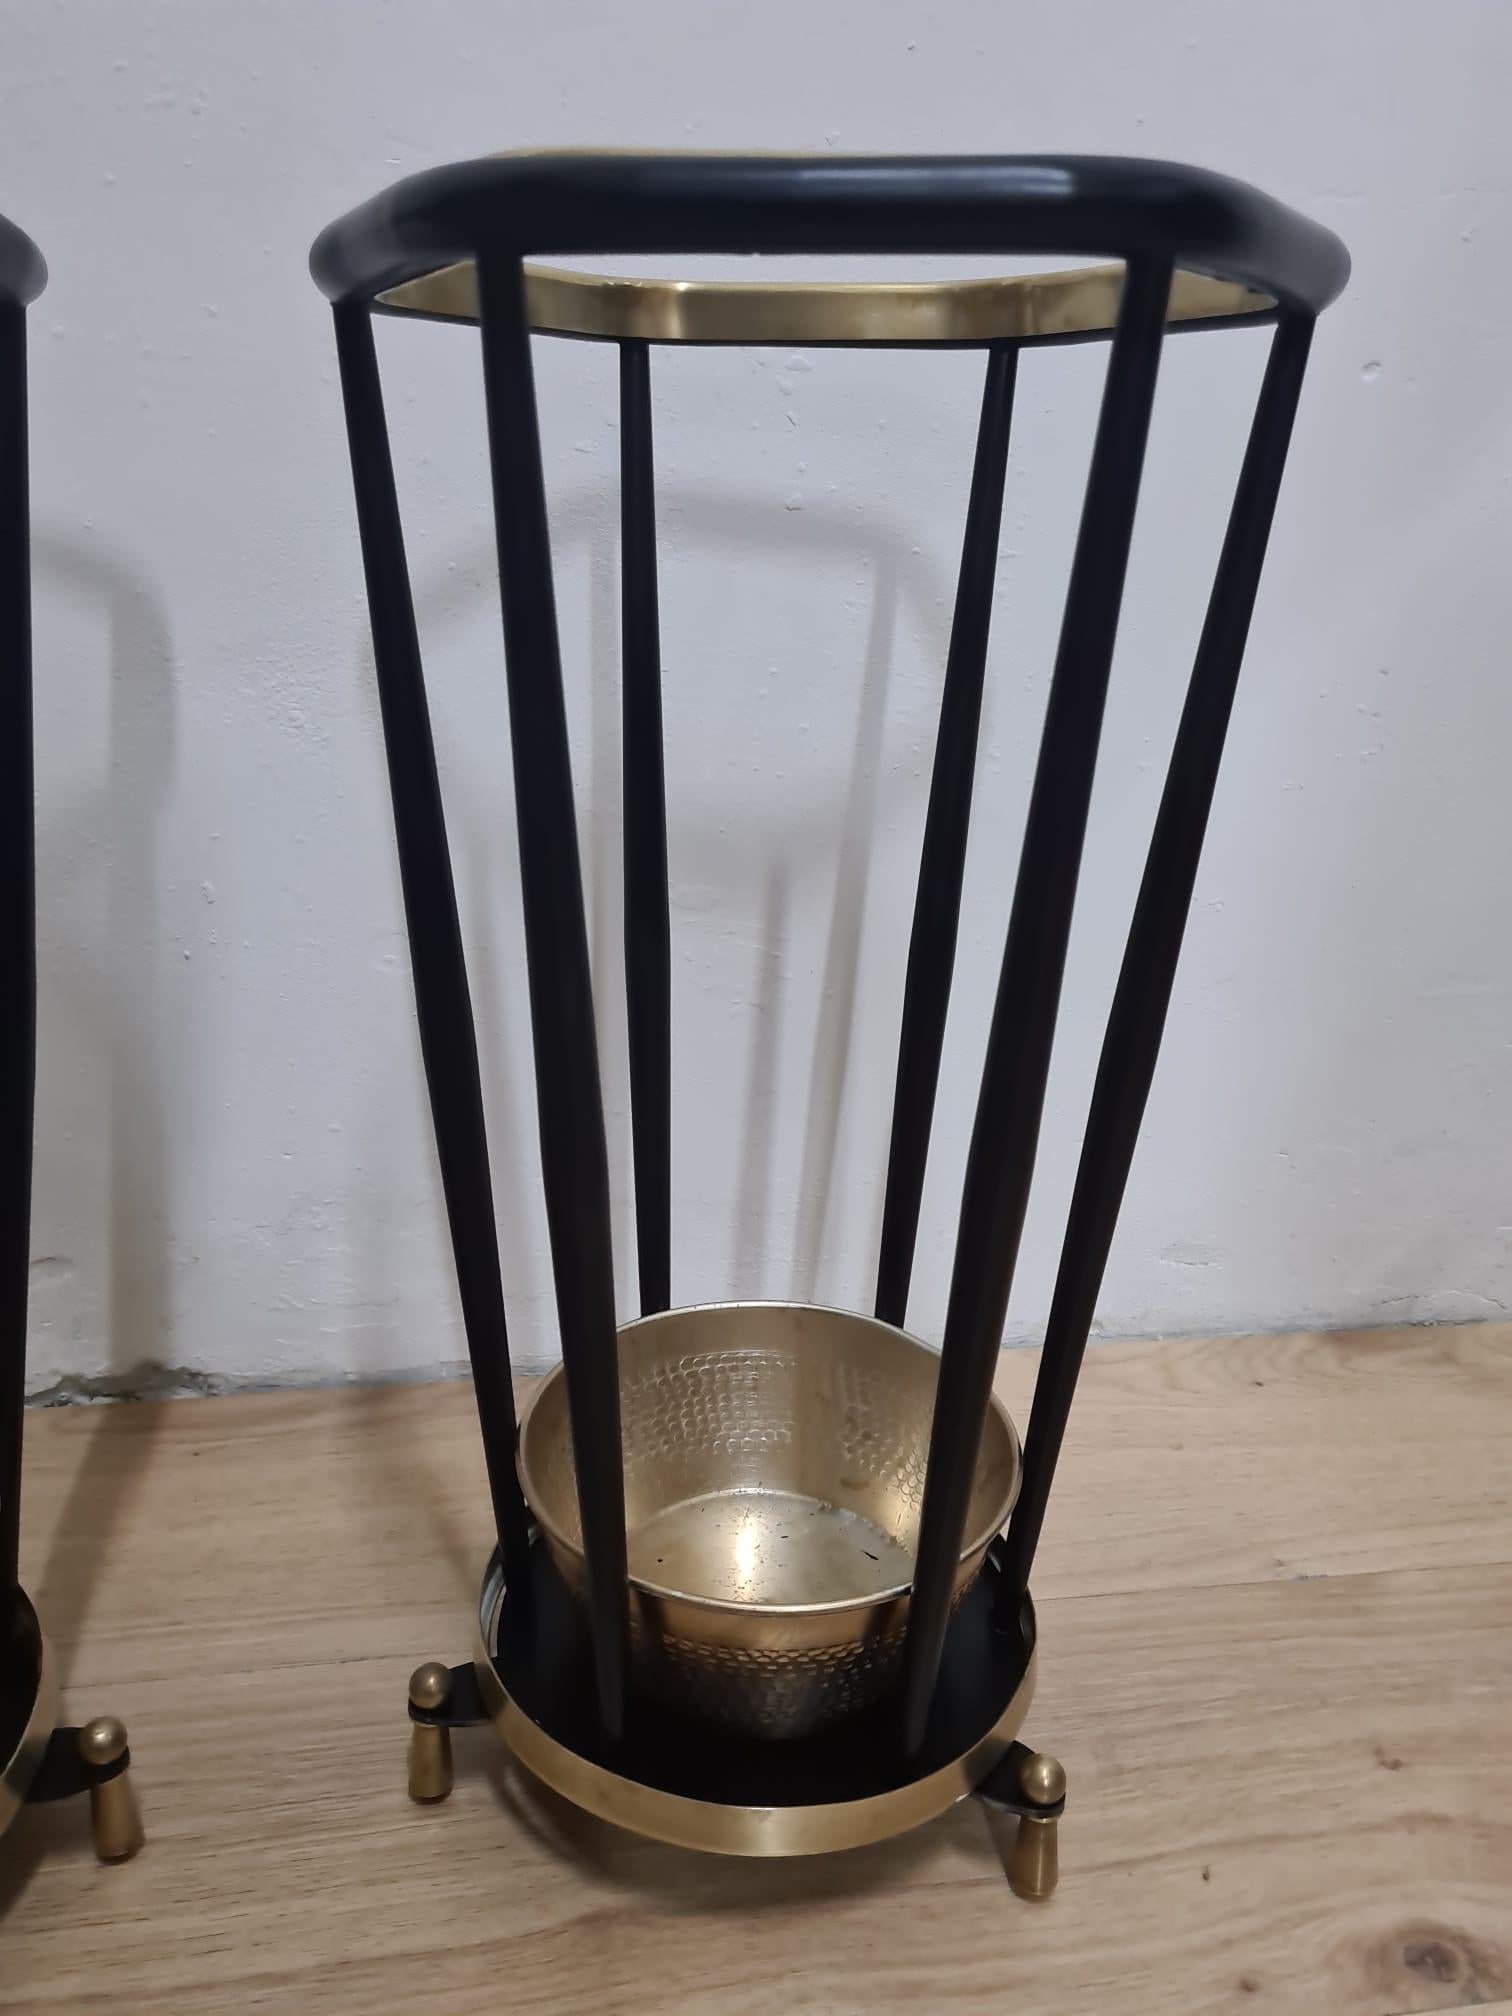 Mid-20th Century Italian Iron and Brass Umbrella Stand from the 1960s For Sale